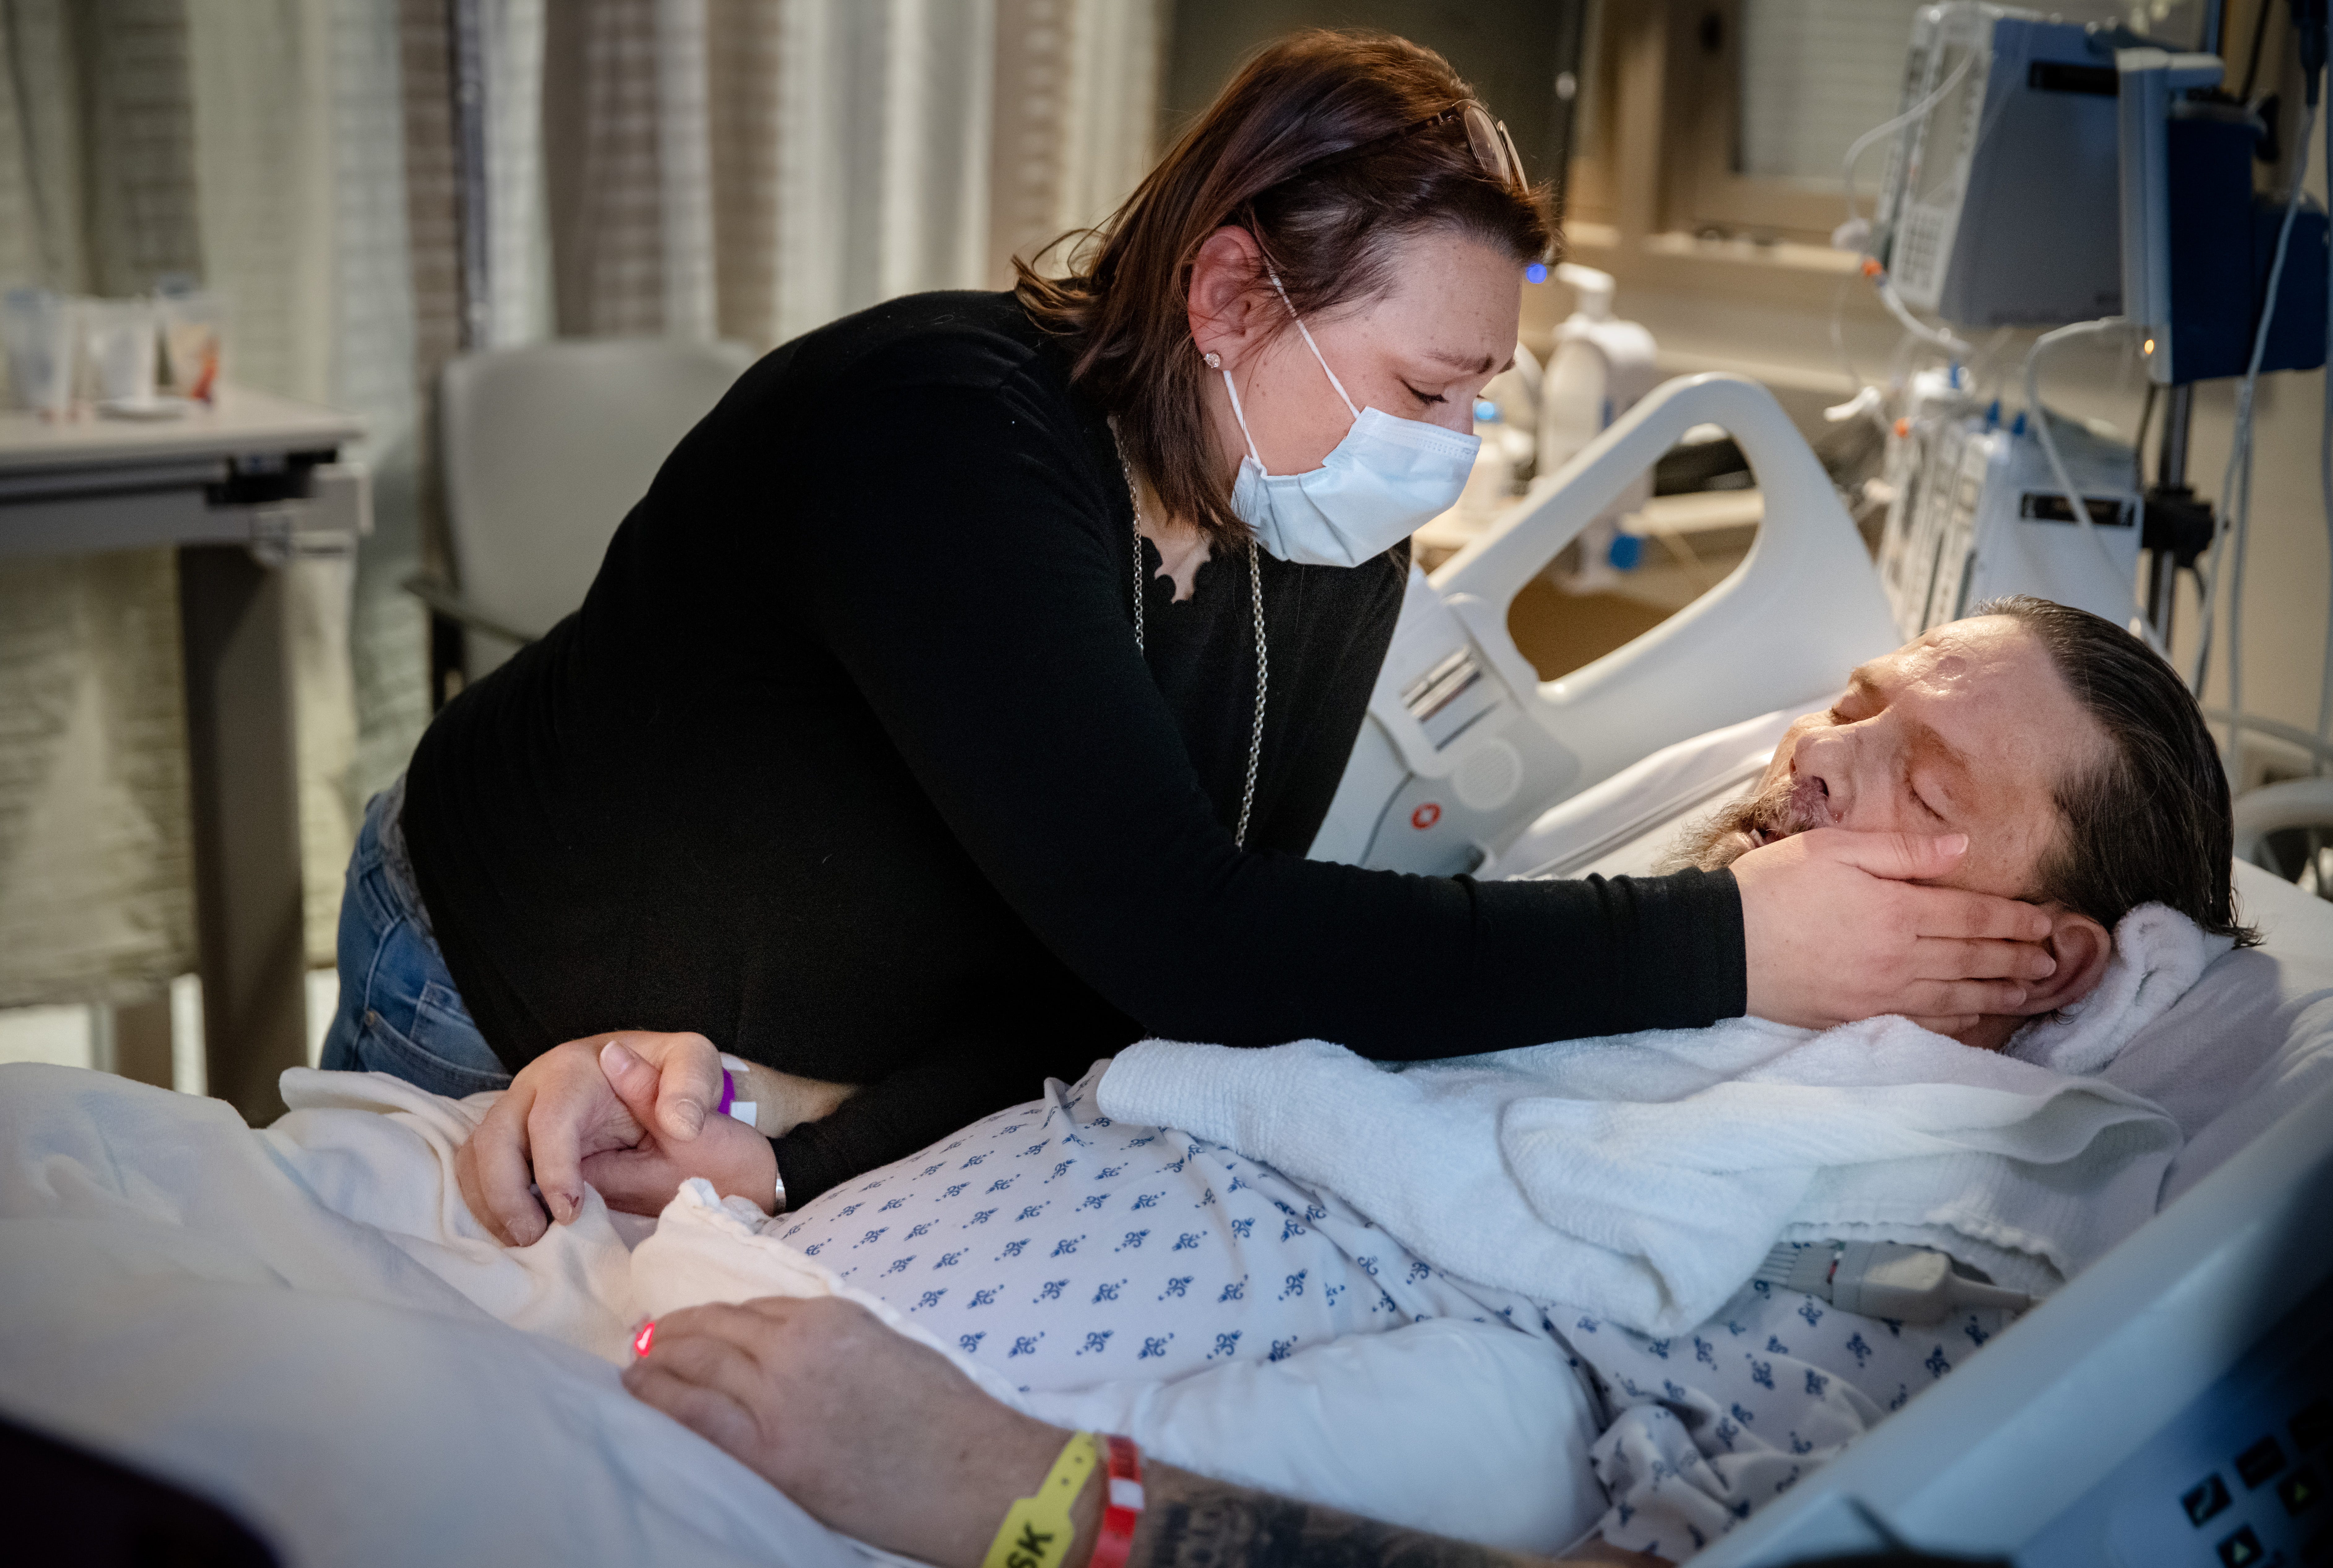 Jennifer caresses her father's cheek and holds his hand as he takes his last breaths after being taken off of a ventilator.